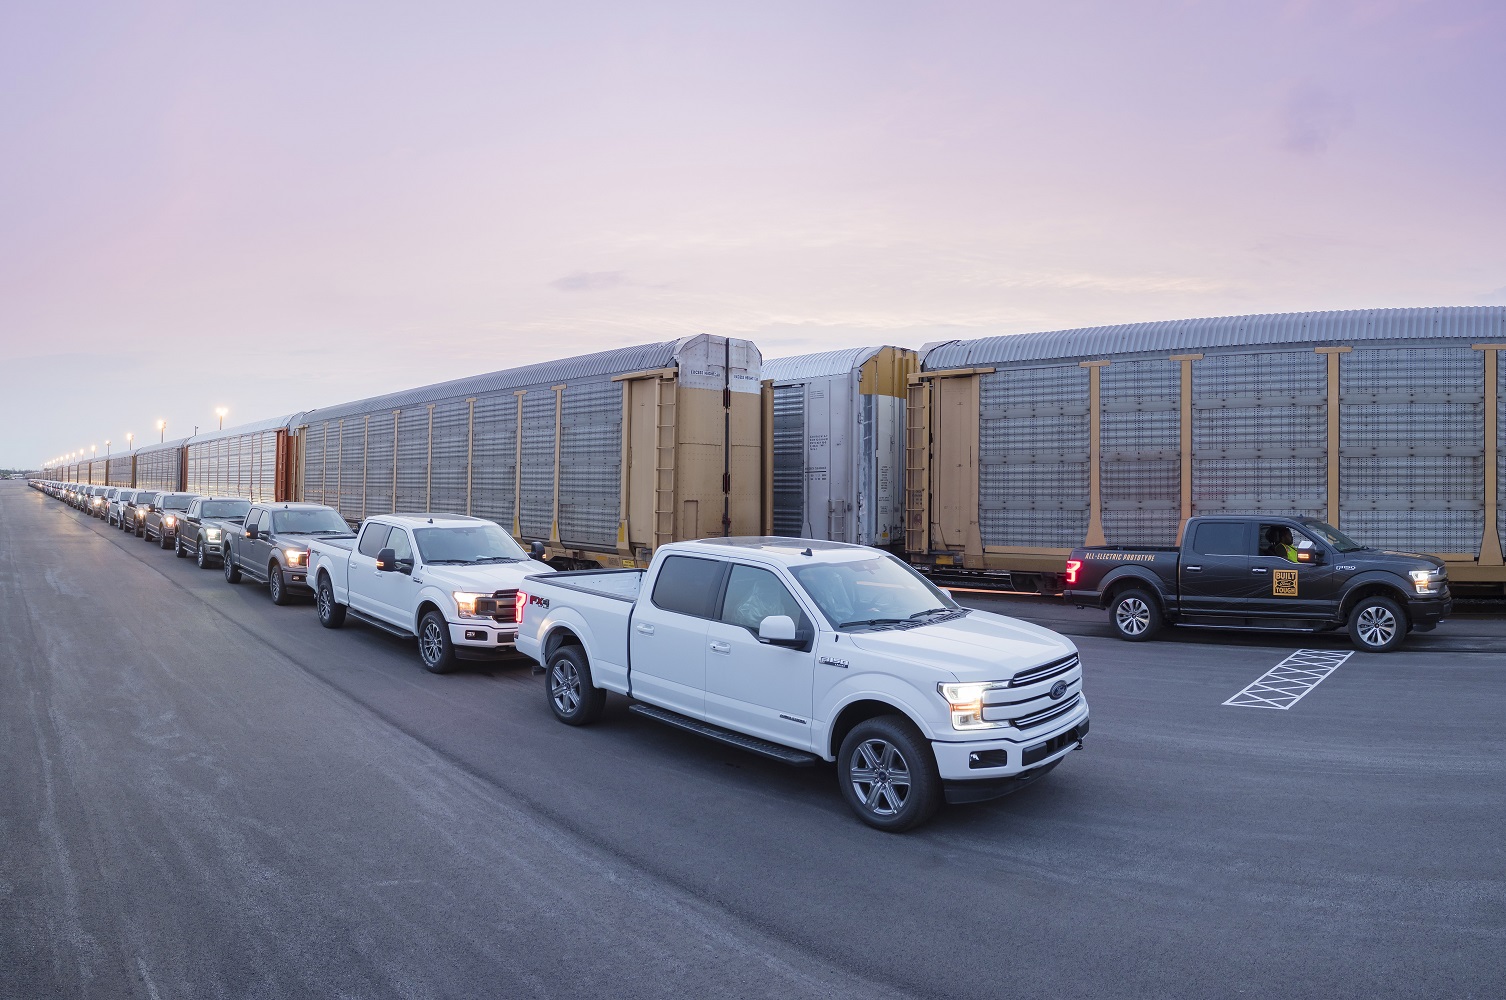 ford plans electric hybrid versions of the f 150 pickup truck all prototype